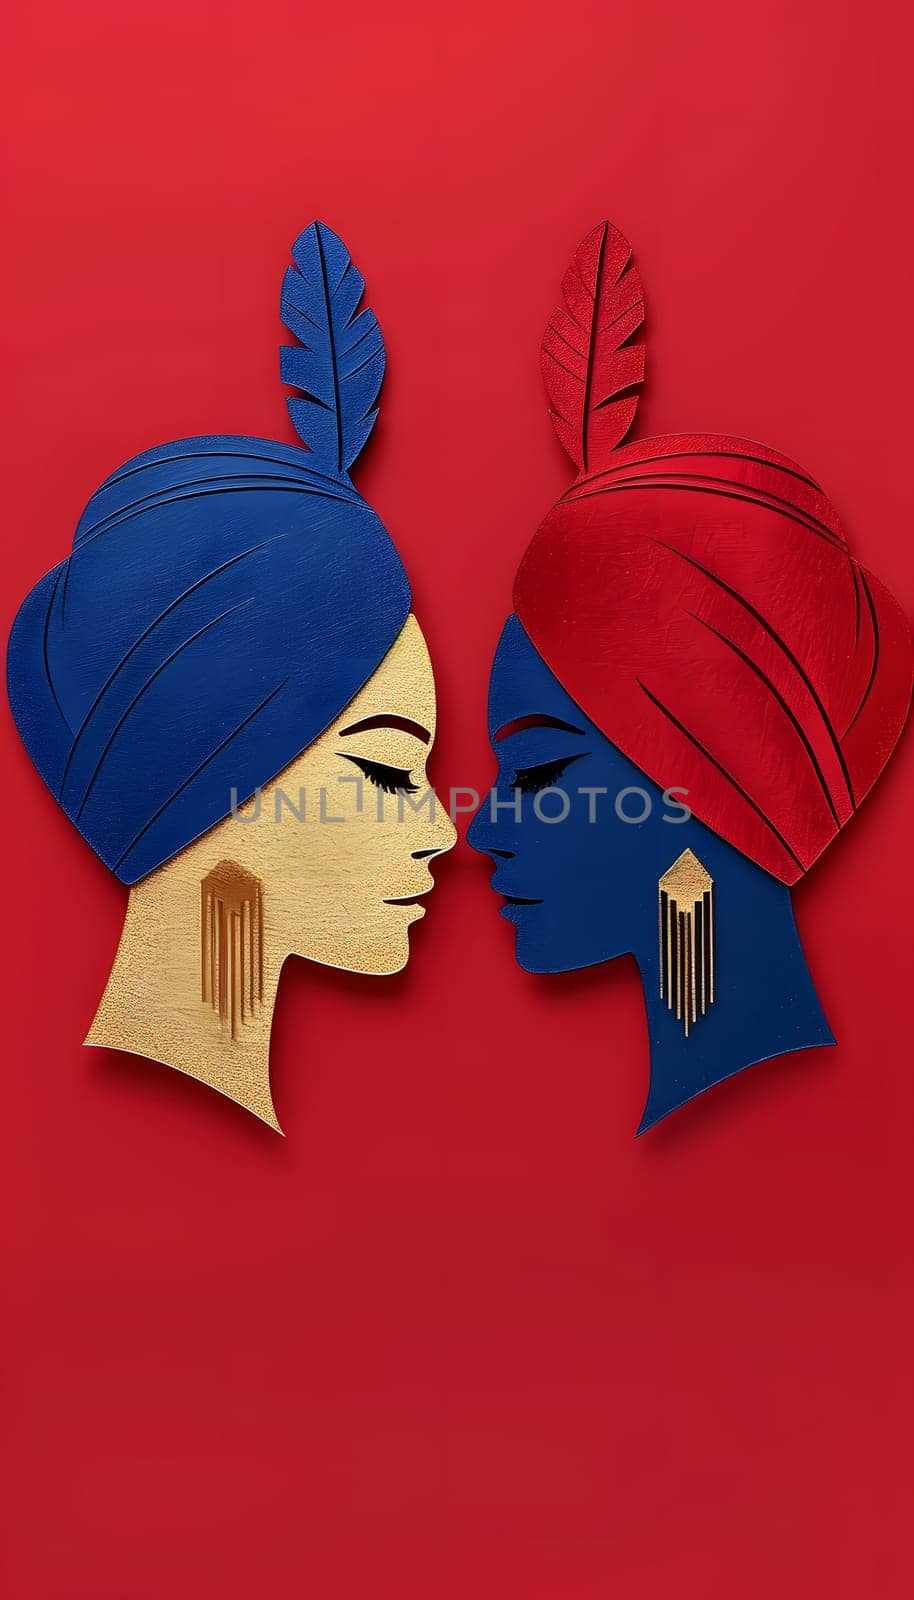 two women wearing turbans and earrings are looking at each other on a red background by Nadtochiy